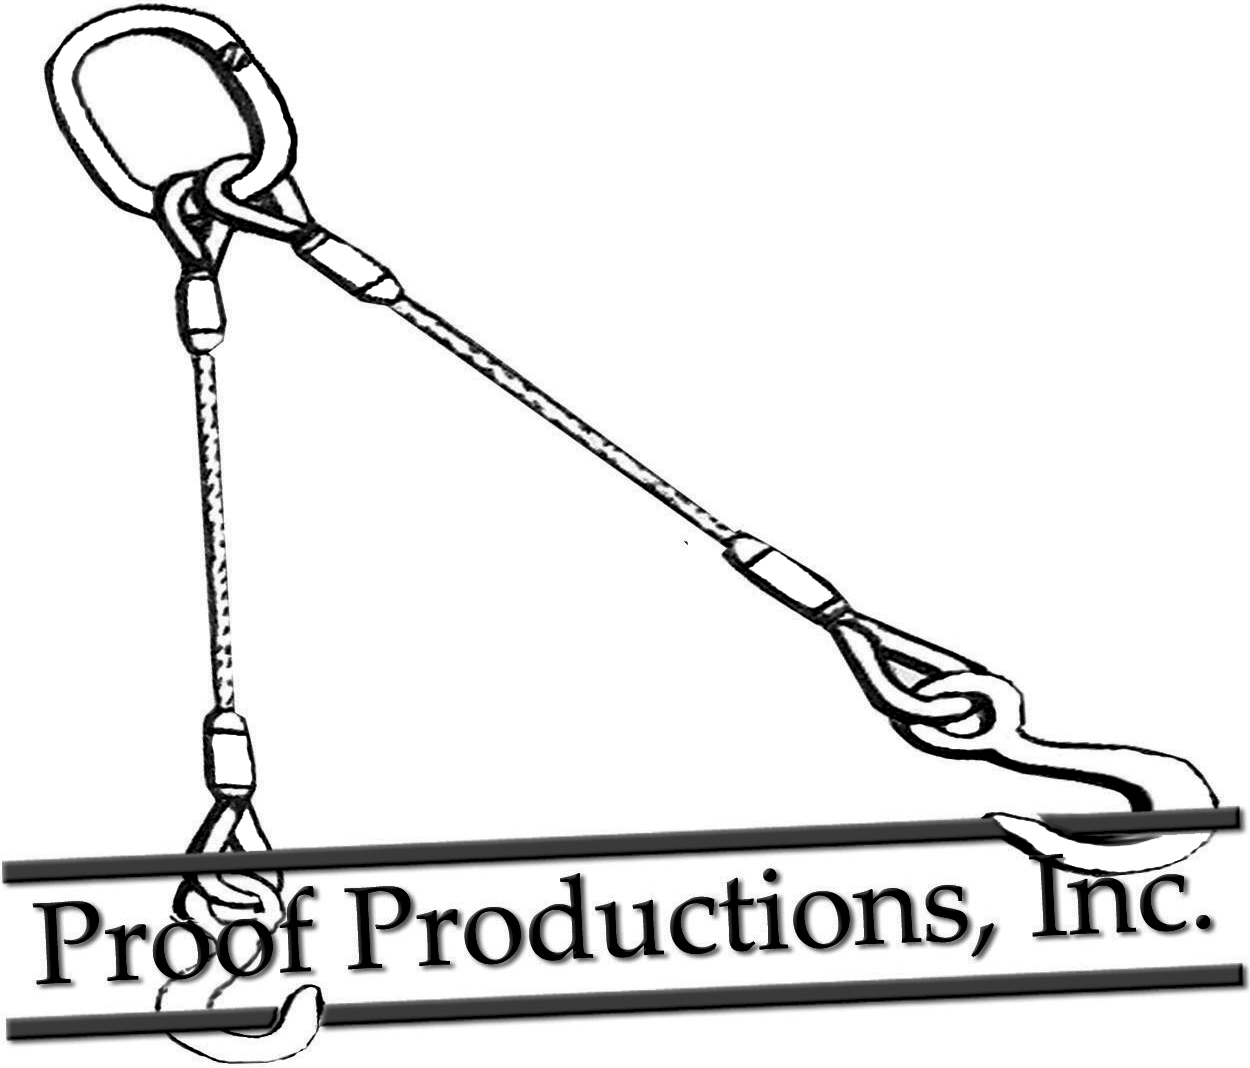 Reliance Proof Productions Logo